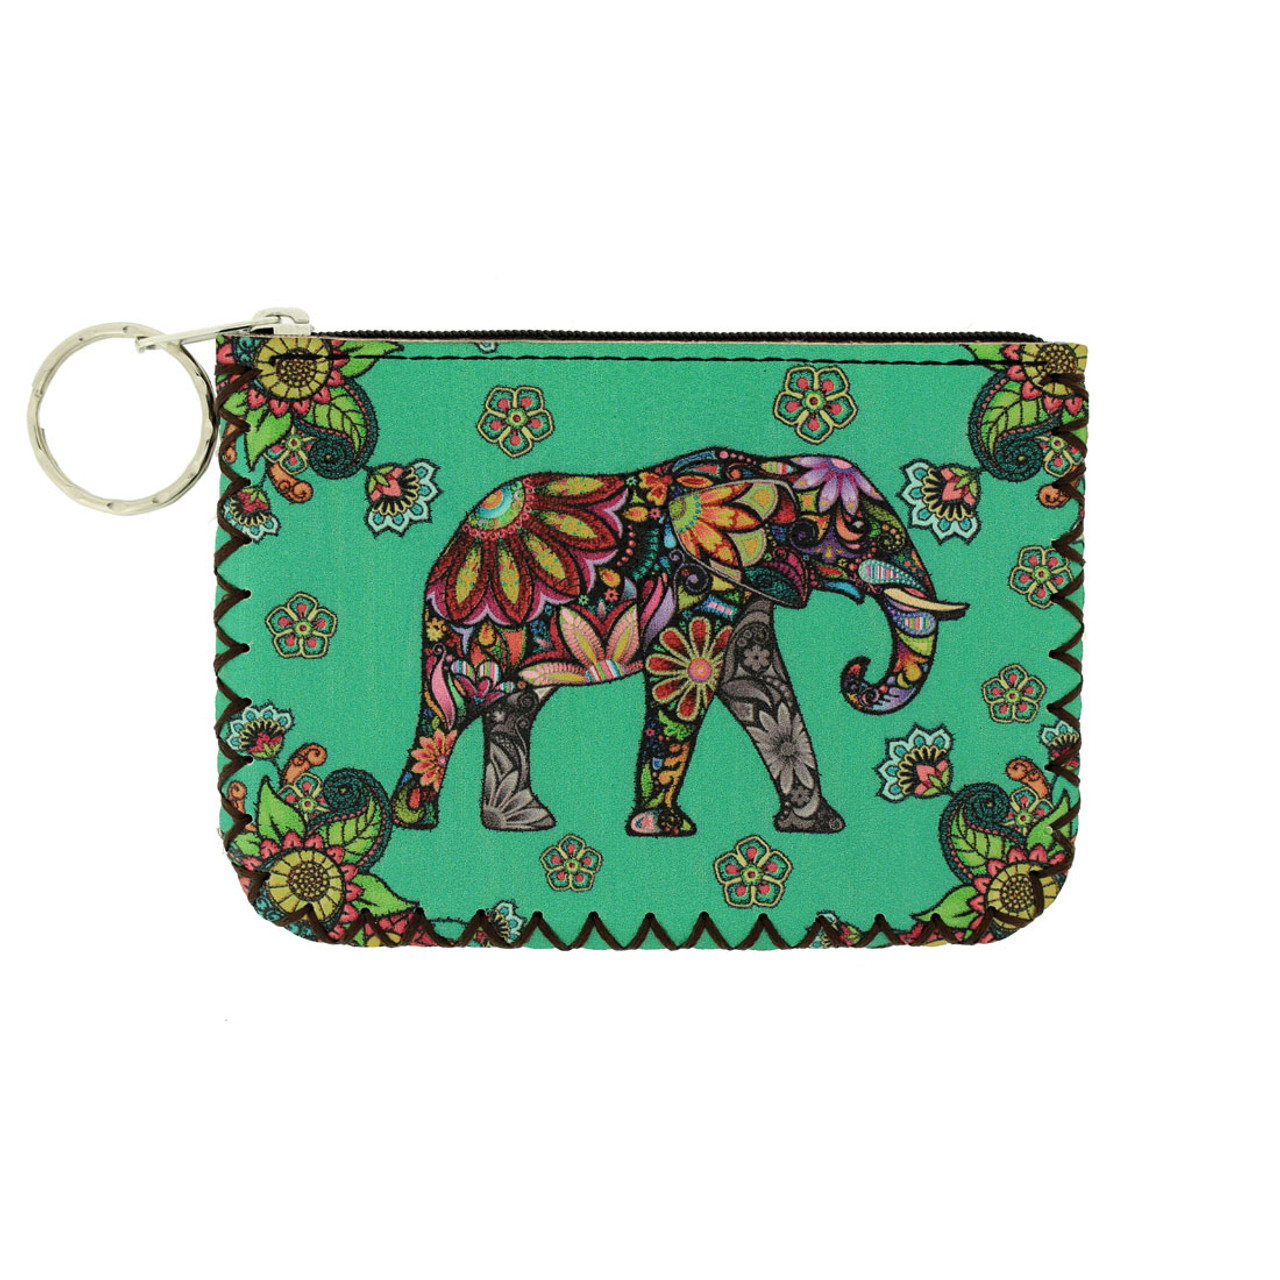 Colorful Elephant and Floral Design Coin Purse